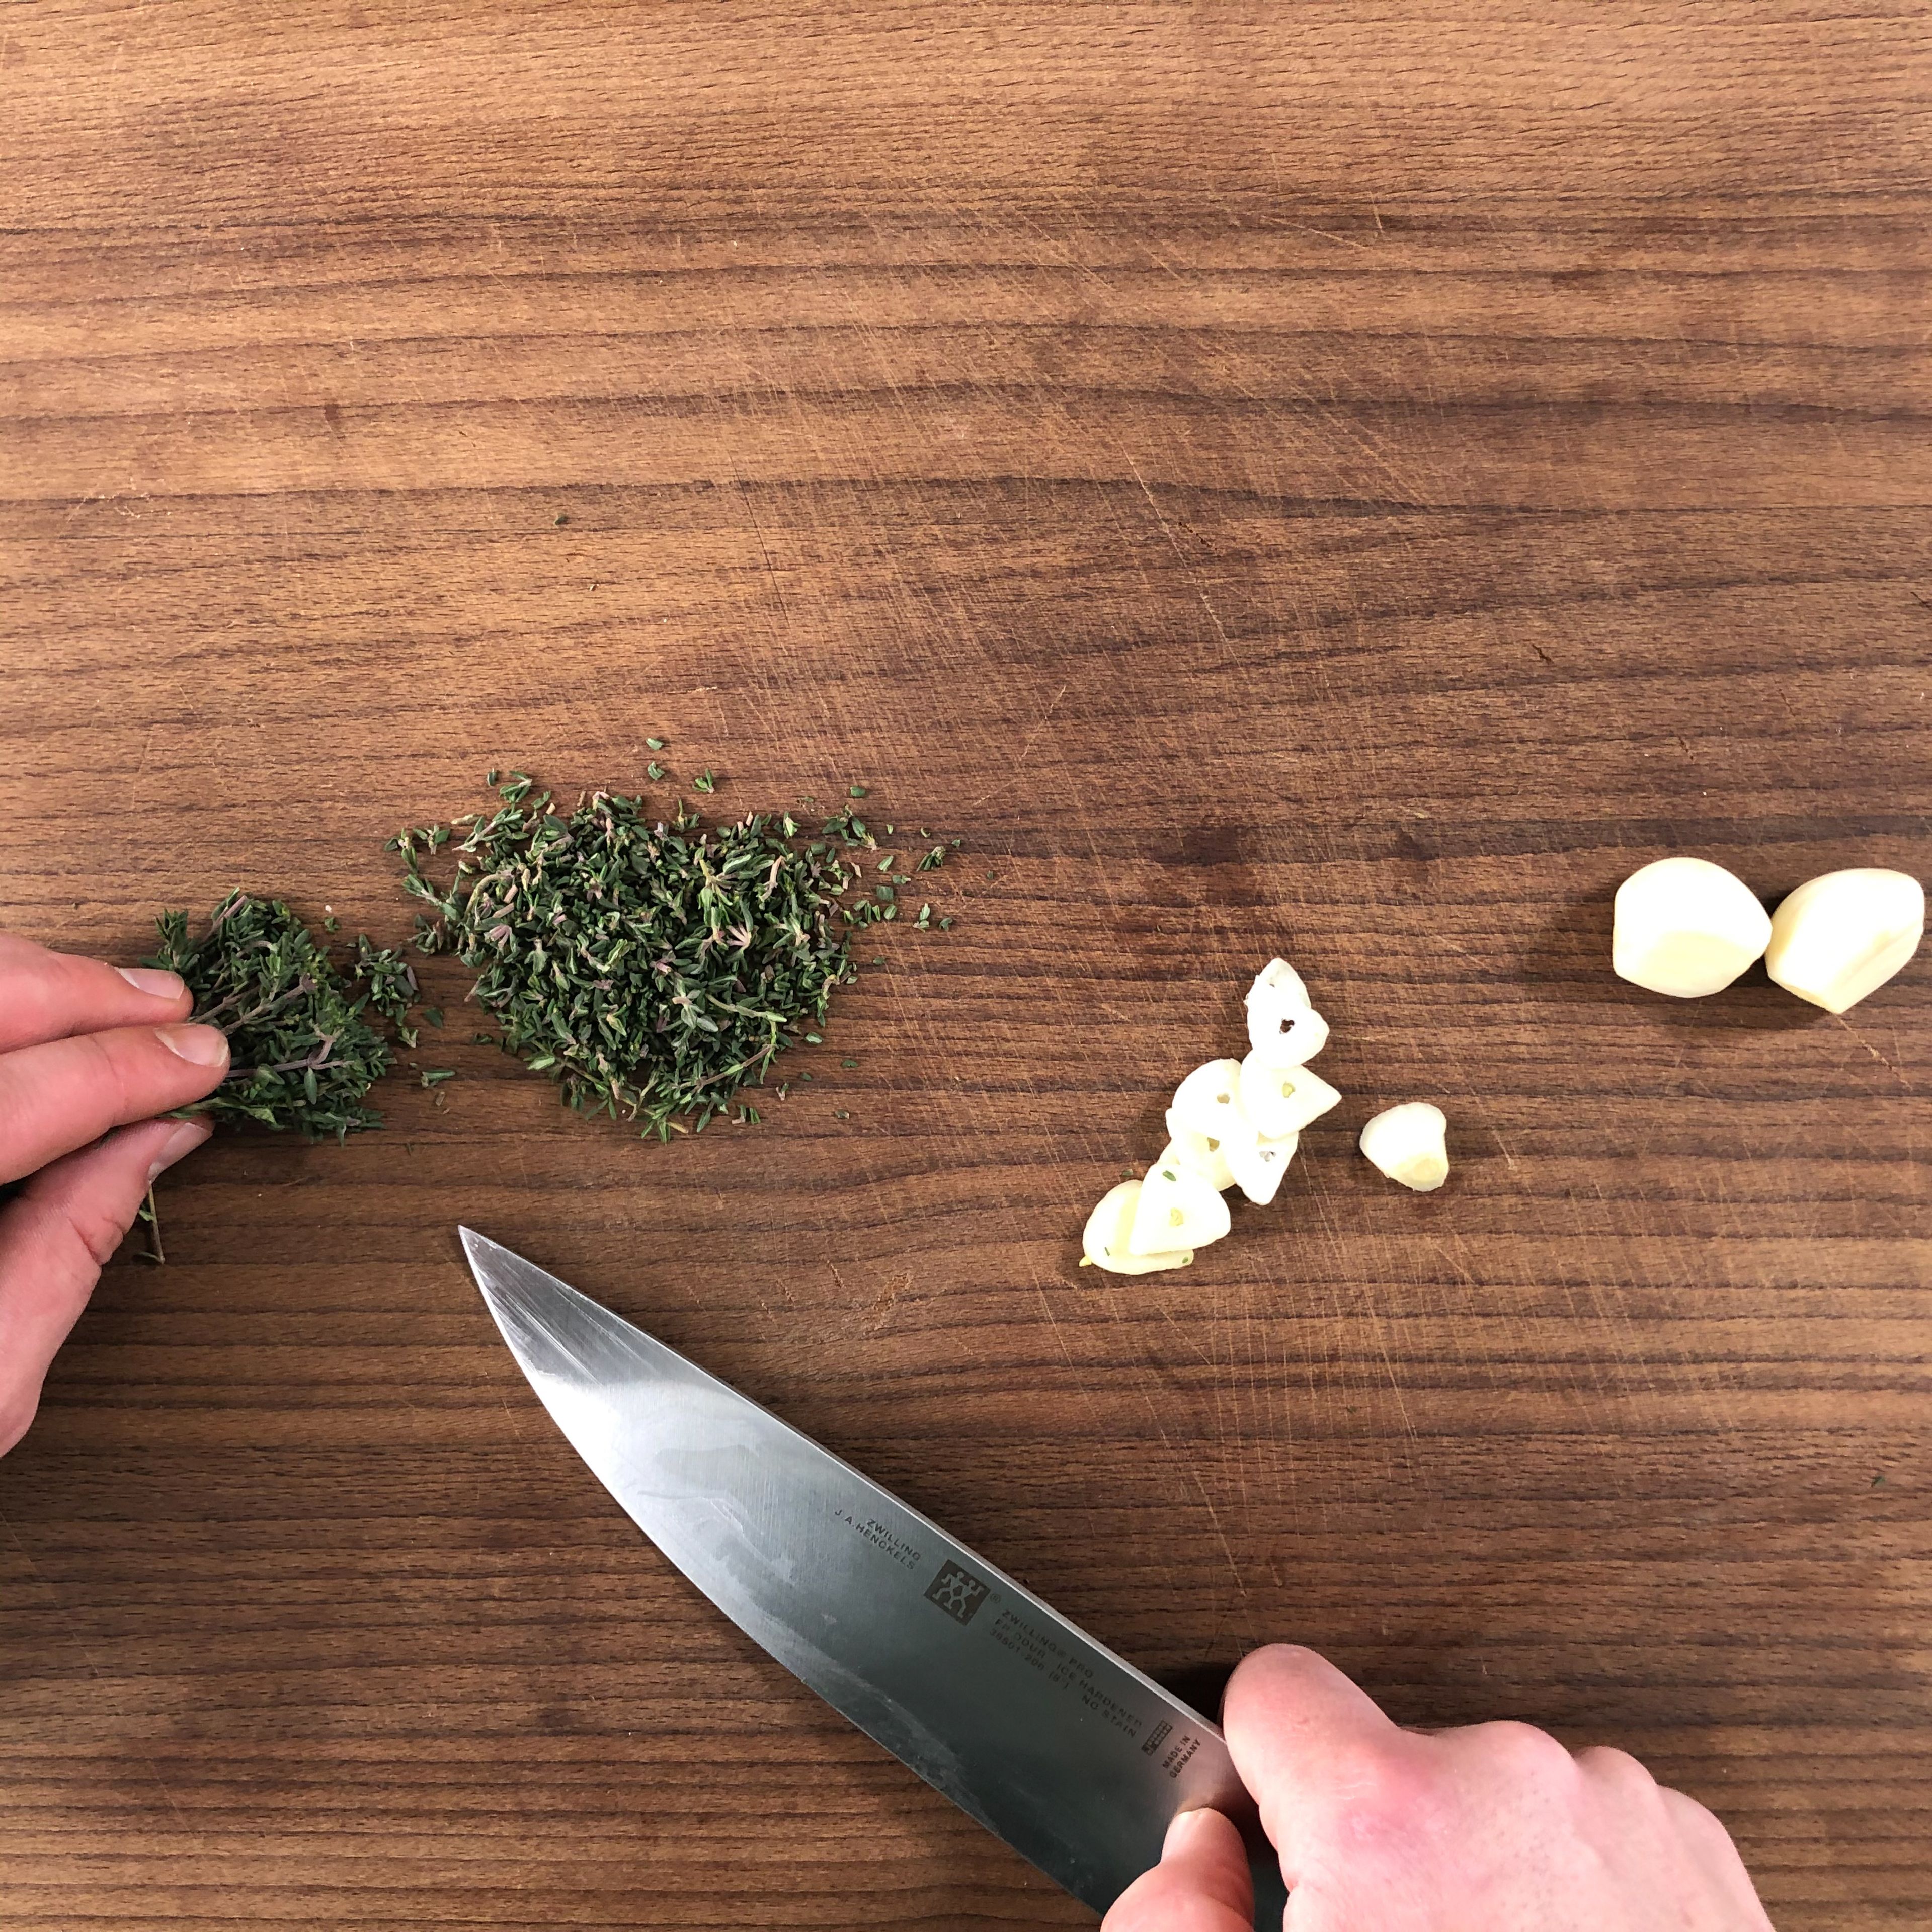 Peel and thinly slice garlic. Chop thyme.